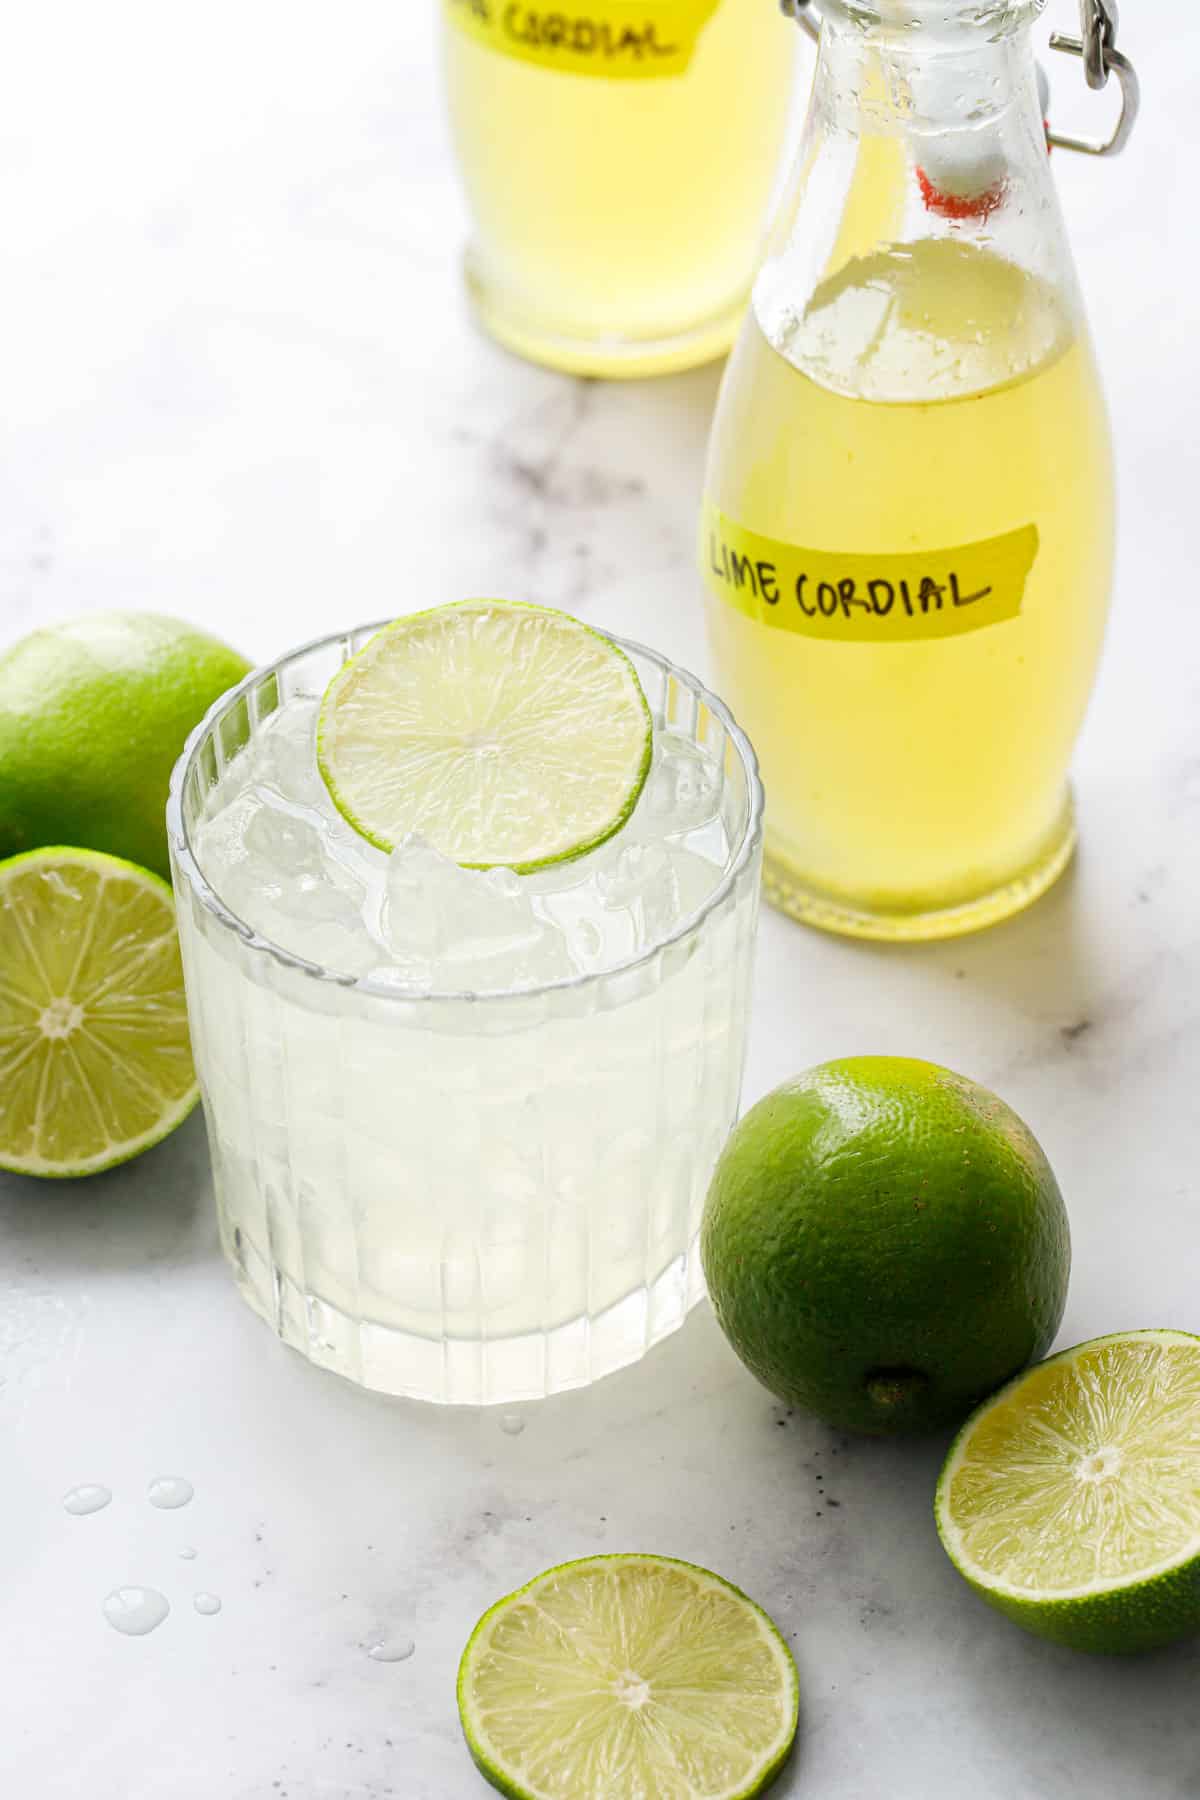 Gimlet cocktail in a lowball glass garnished with a lime slice, with two bottles of Homemade Lime Cordial and fresh limes in the background.